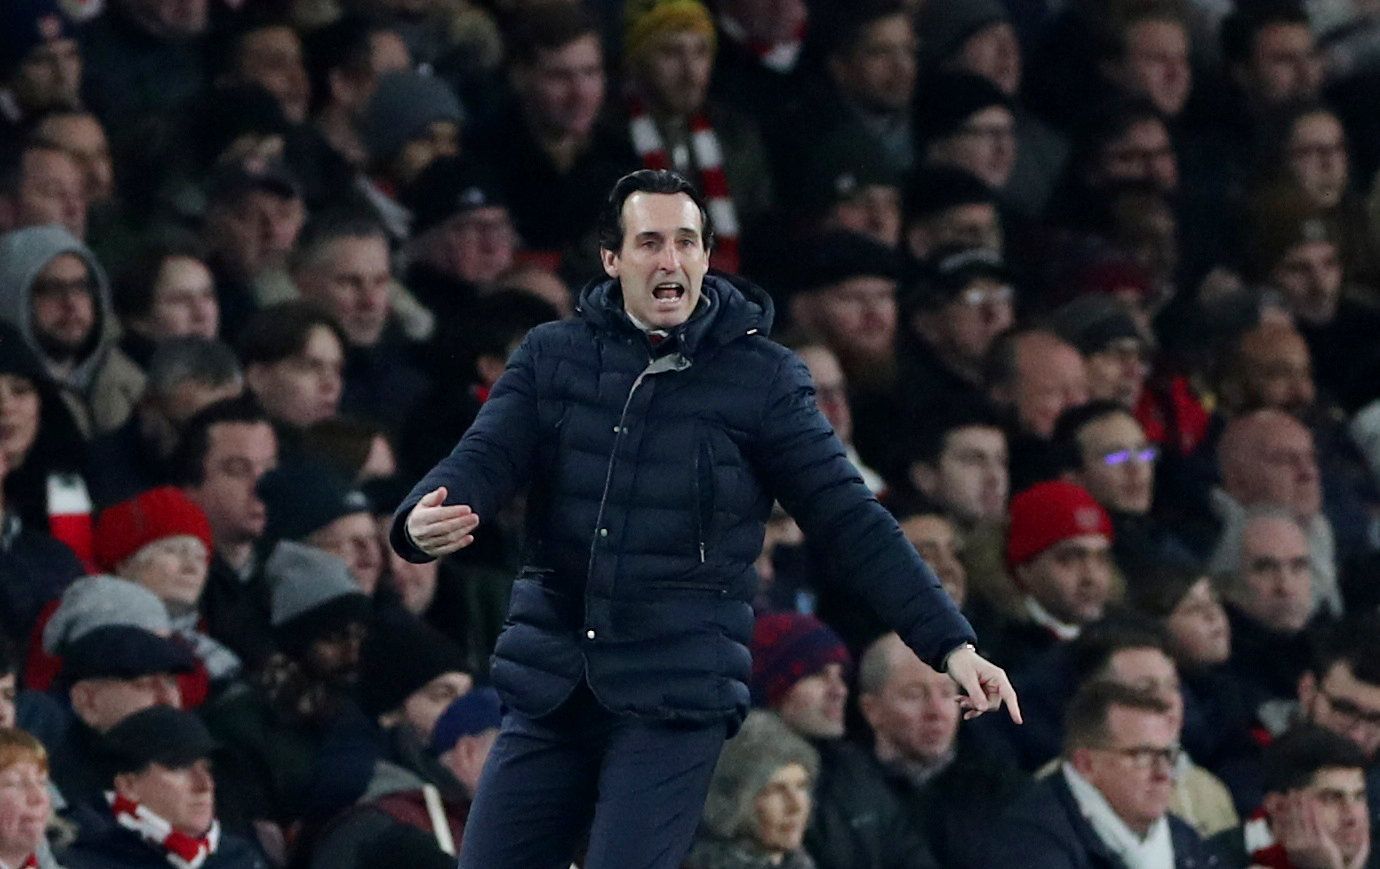 Soccer Football - Premier League - Arsenal v Chelsea - Emirates Stadium, London, Britain - January 19, 2019  Arsenal manager Unai Emery reacts  REUTERS/Hannah Mckay  EDITORIAL USE ONLY. No use with unauthorized audio, video, data, fixture lists, club/league logos or 